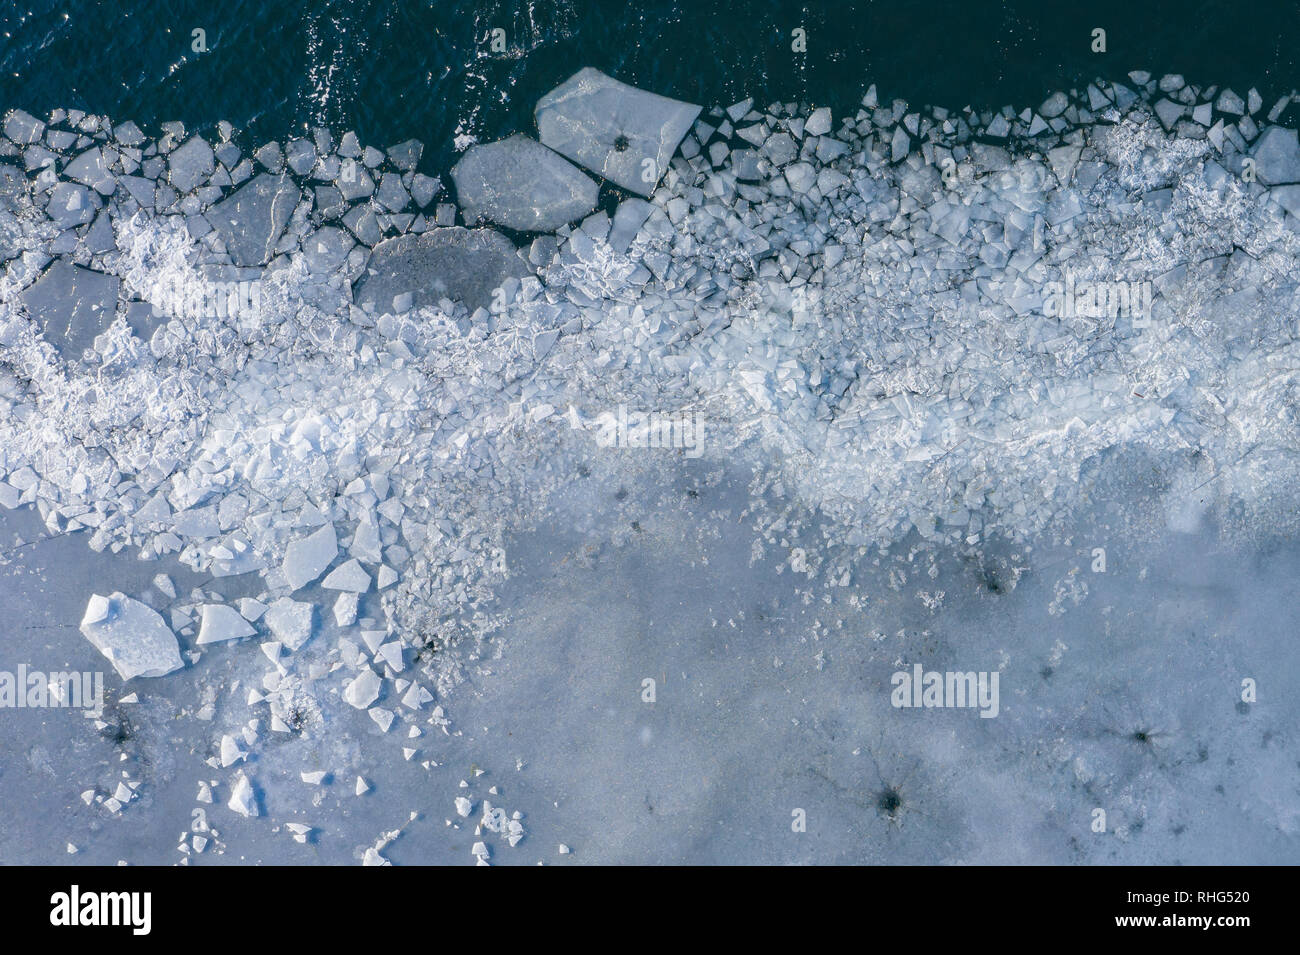 Glacier Lagoon with icebergs from above. Aerial View. Cracked Ice from ...